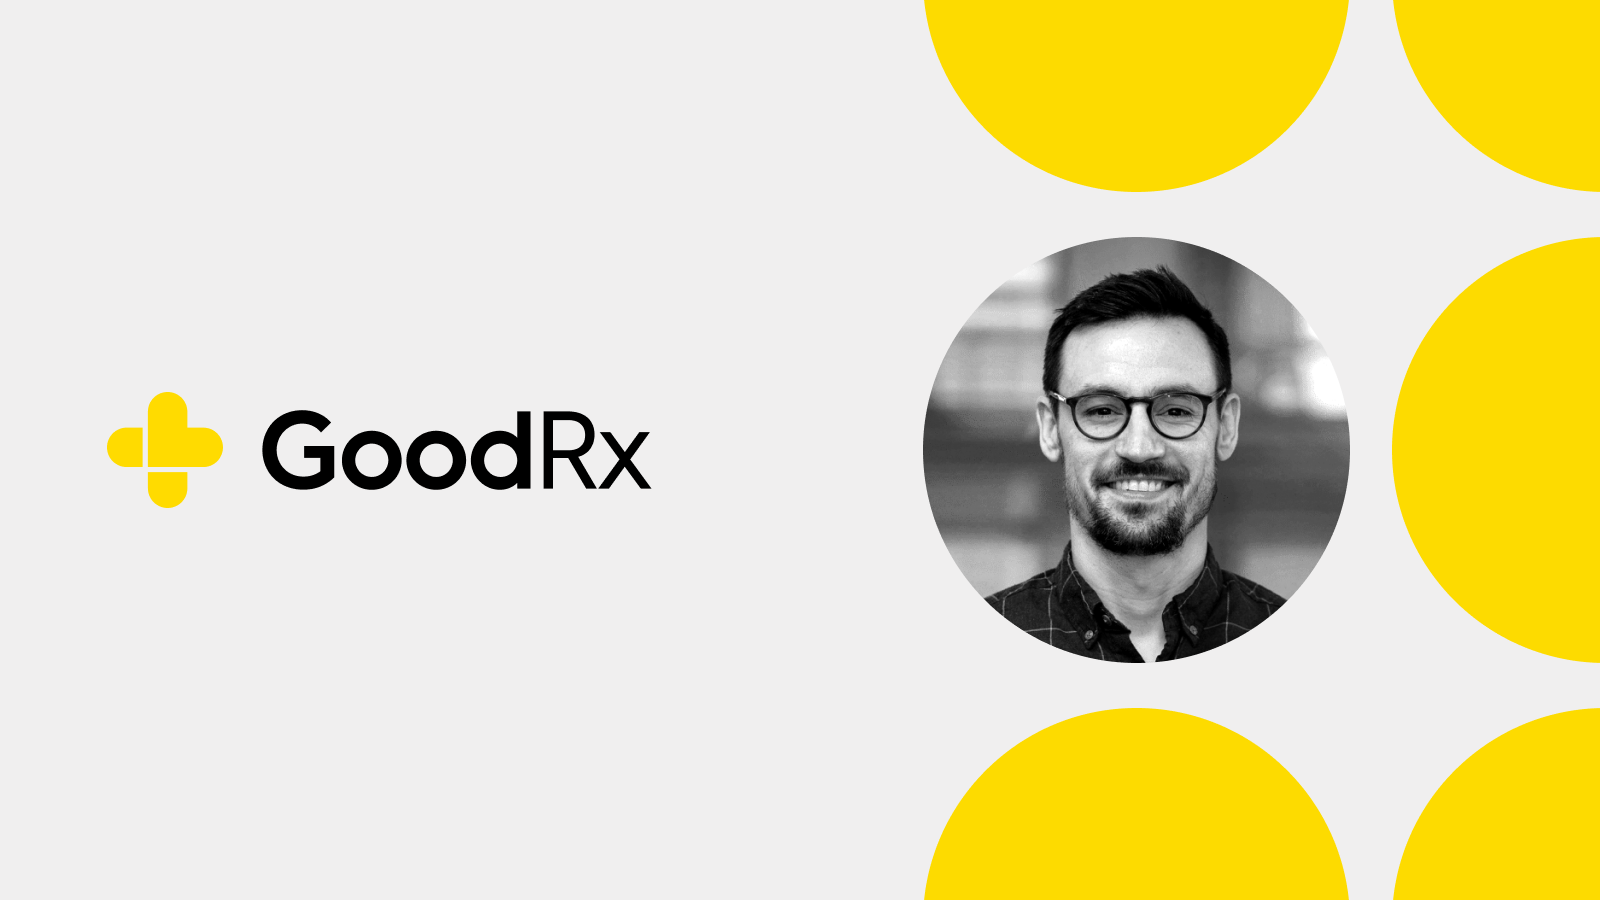 Introducing GoodRx Care: Affordable, Convenient Online Healthcare - GoodRx